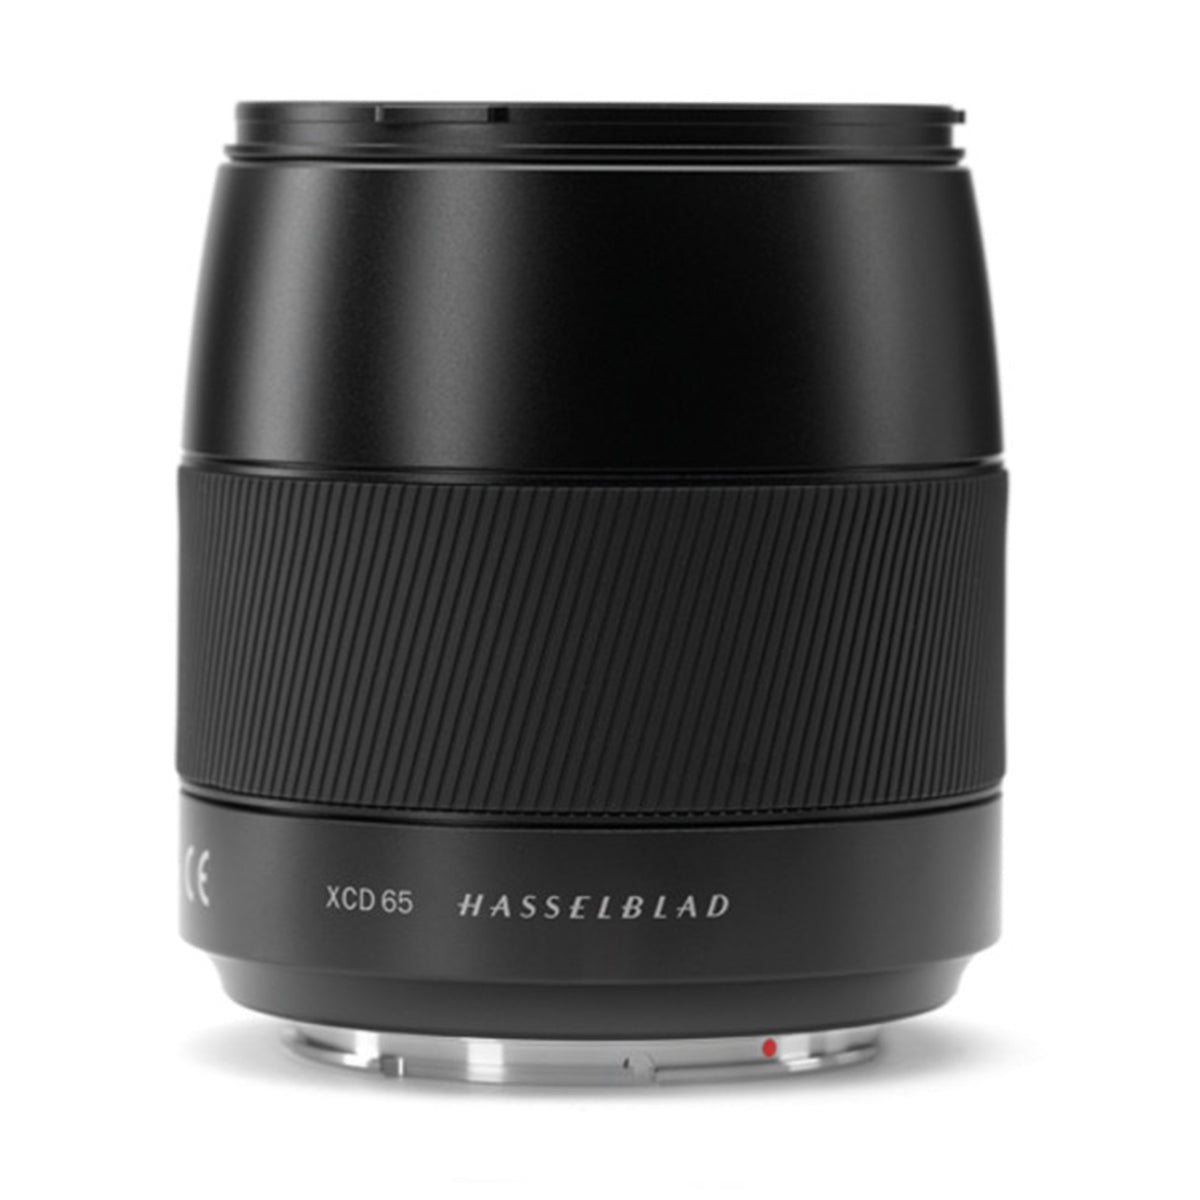 Hasselblad XCD 65mm f2.8 lens